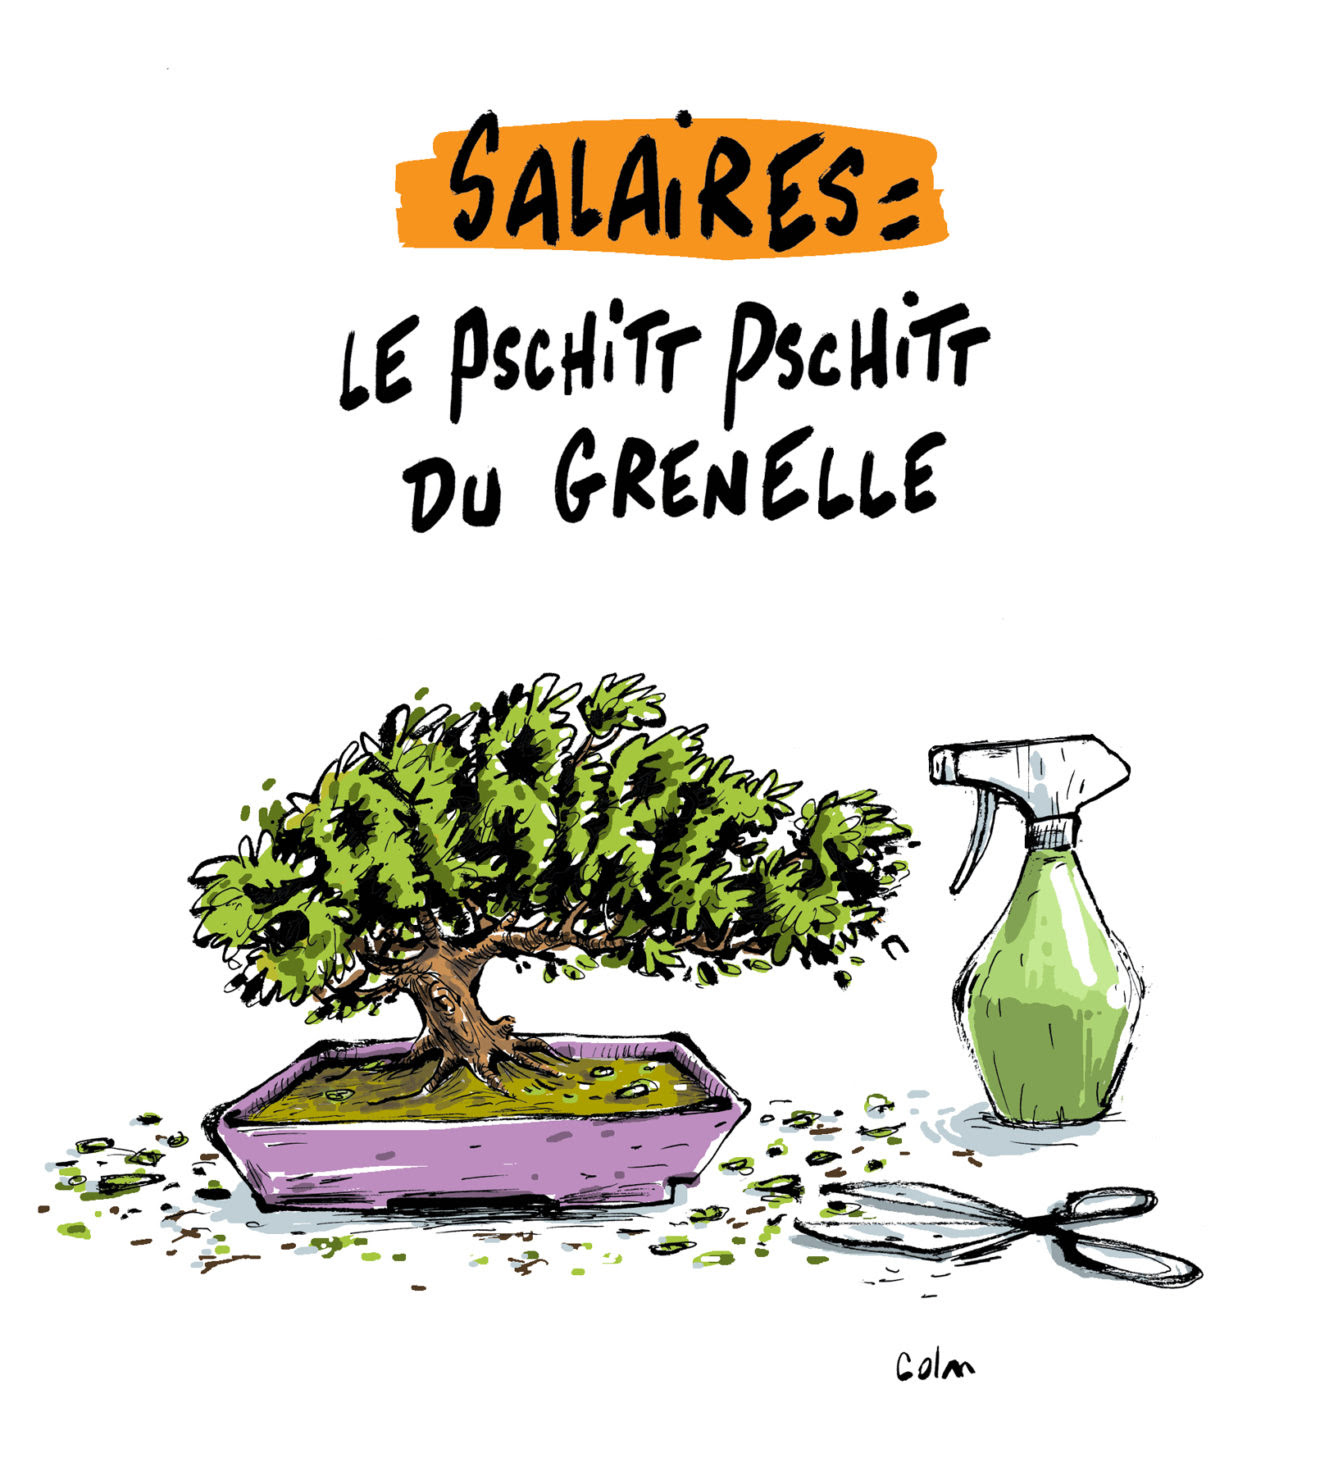 Grenelle : réaction FO